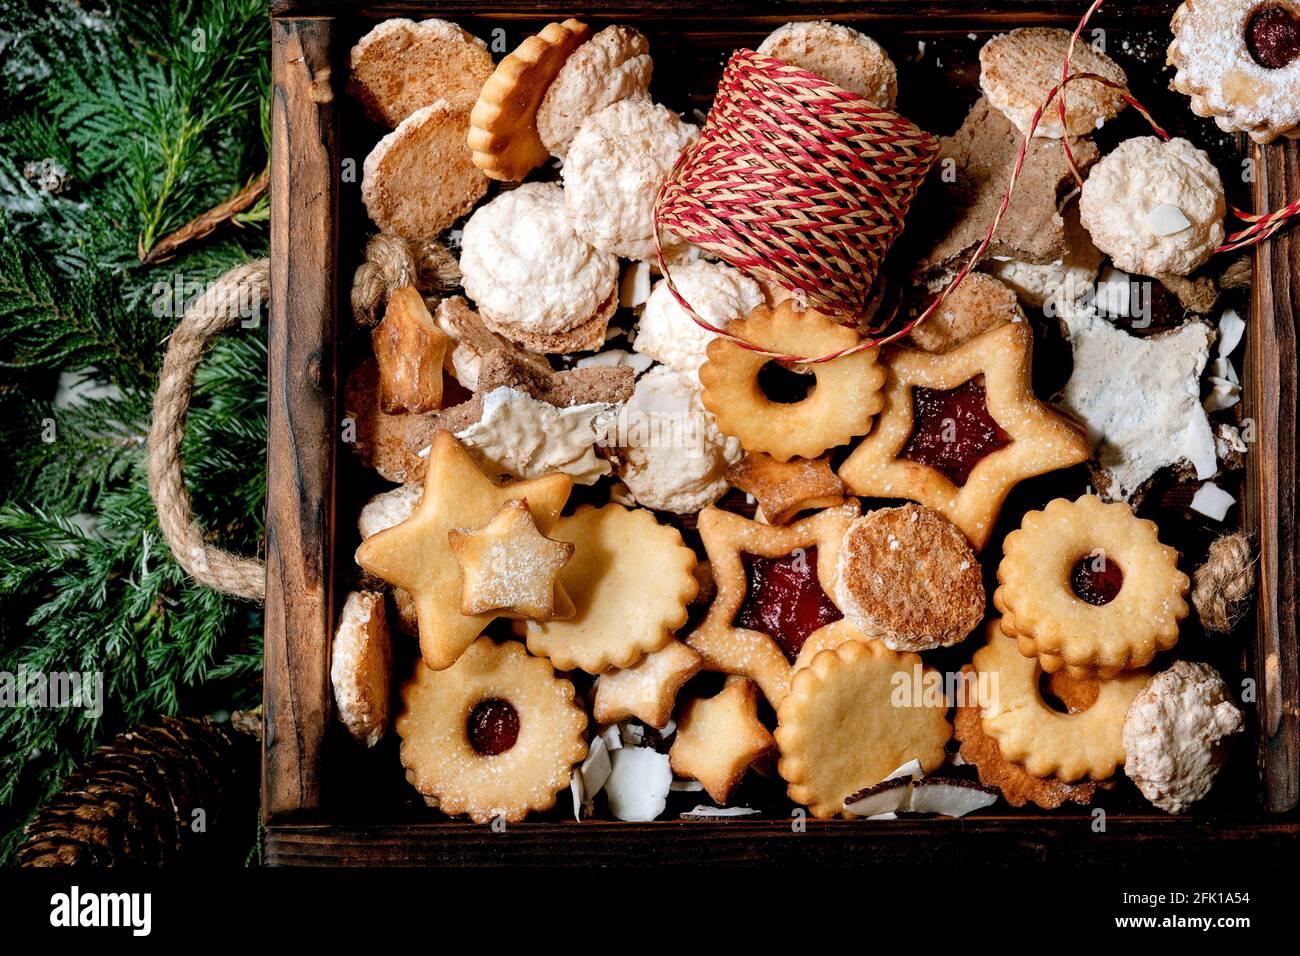 https://c8.alamy.com/comp/2FK1A54/christmas-homemade-shortbread-biscuits-cookies-collection-different-shapes-include-traditional-linz-biscuits-with-red-jam-in-wooden-tray-over-thuja-b-2FK1A54.jpg